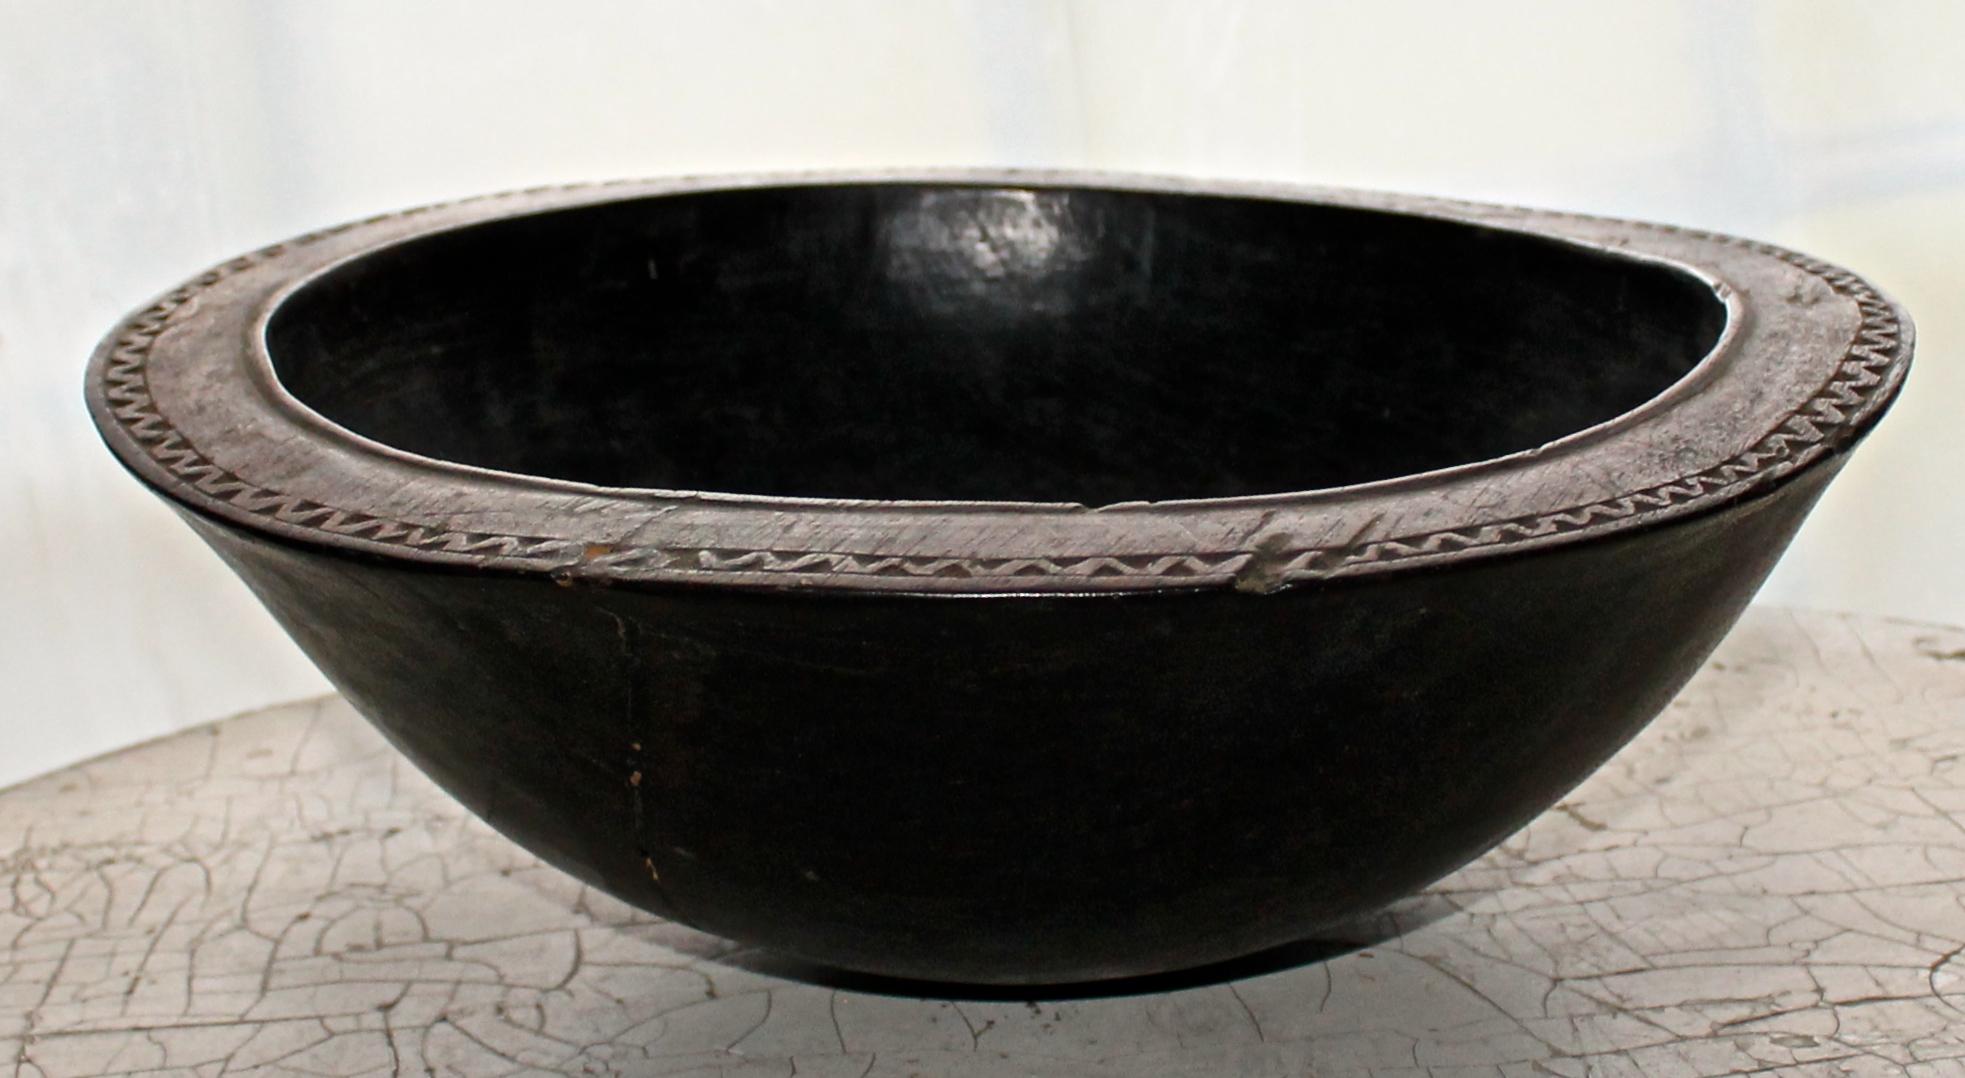 Ornately decorated rim, with abstract carving on bottom. Beautiful rich patina.